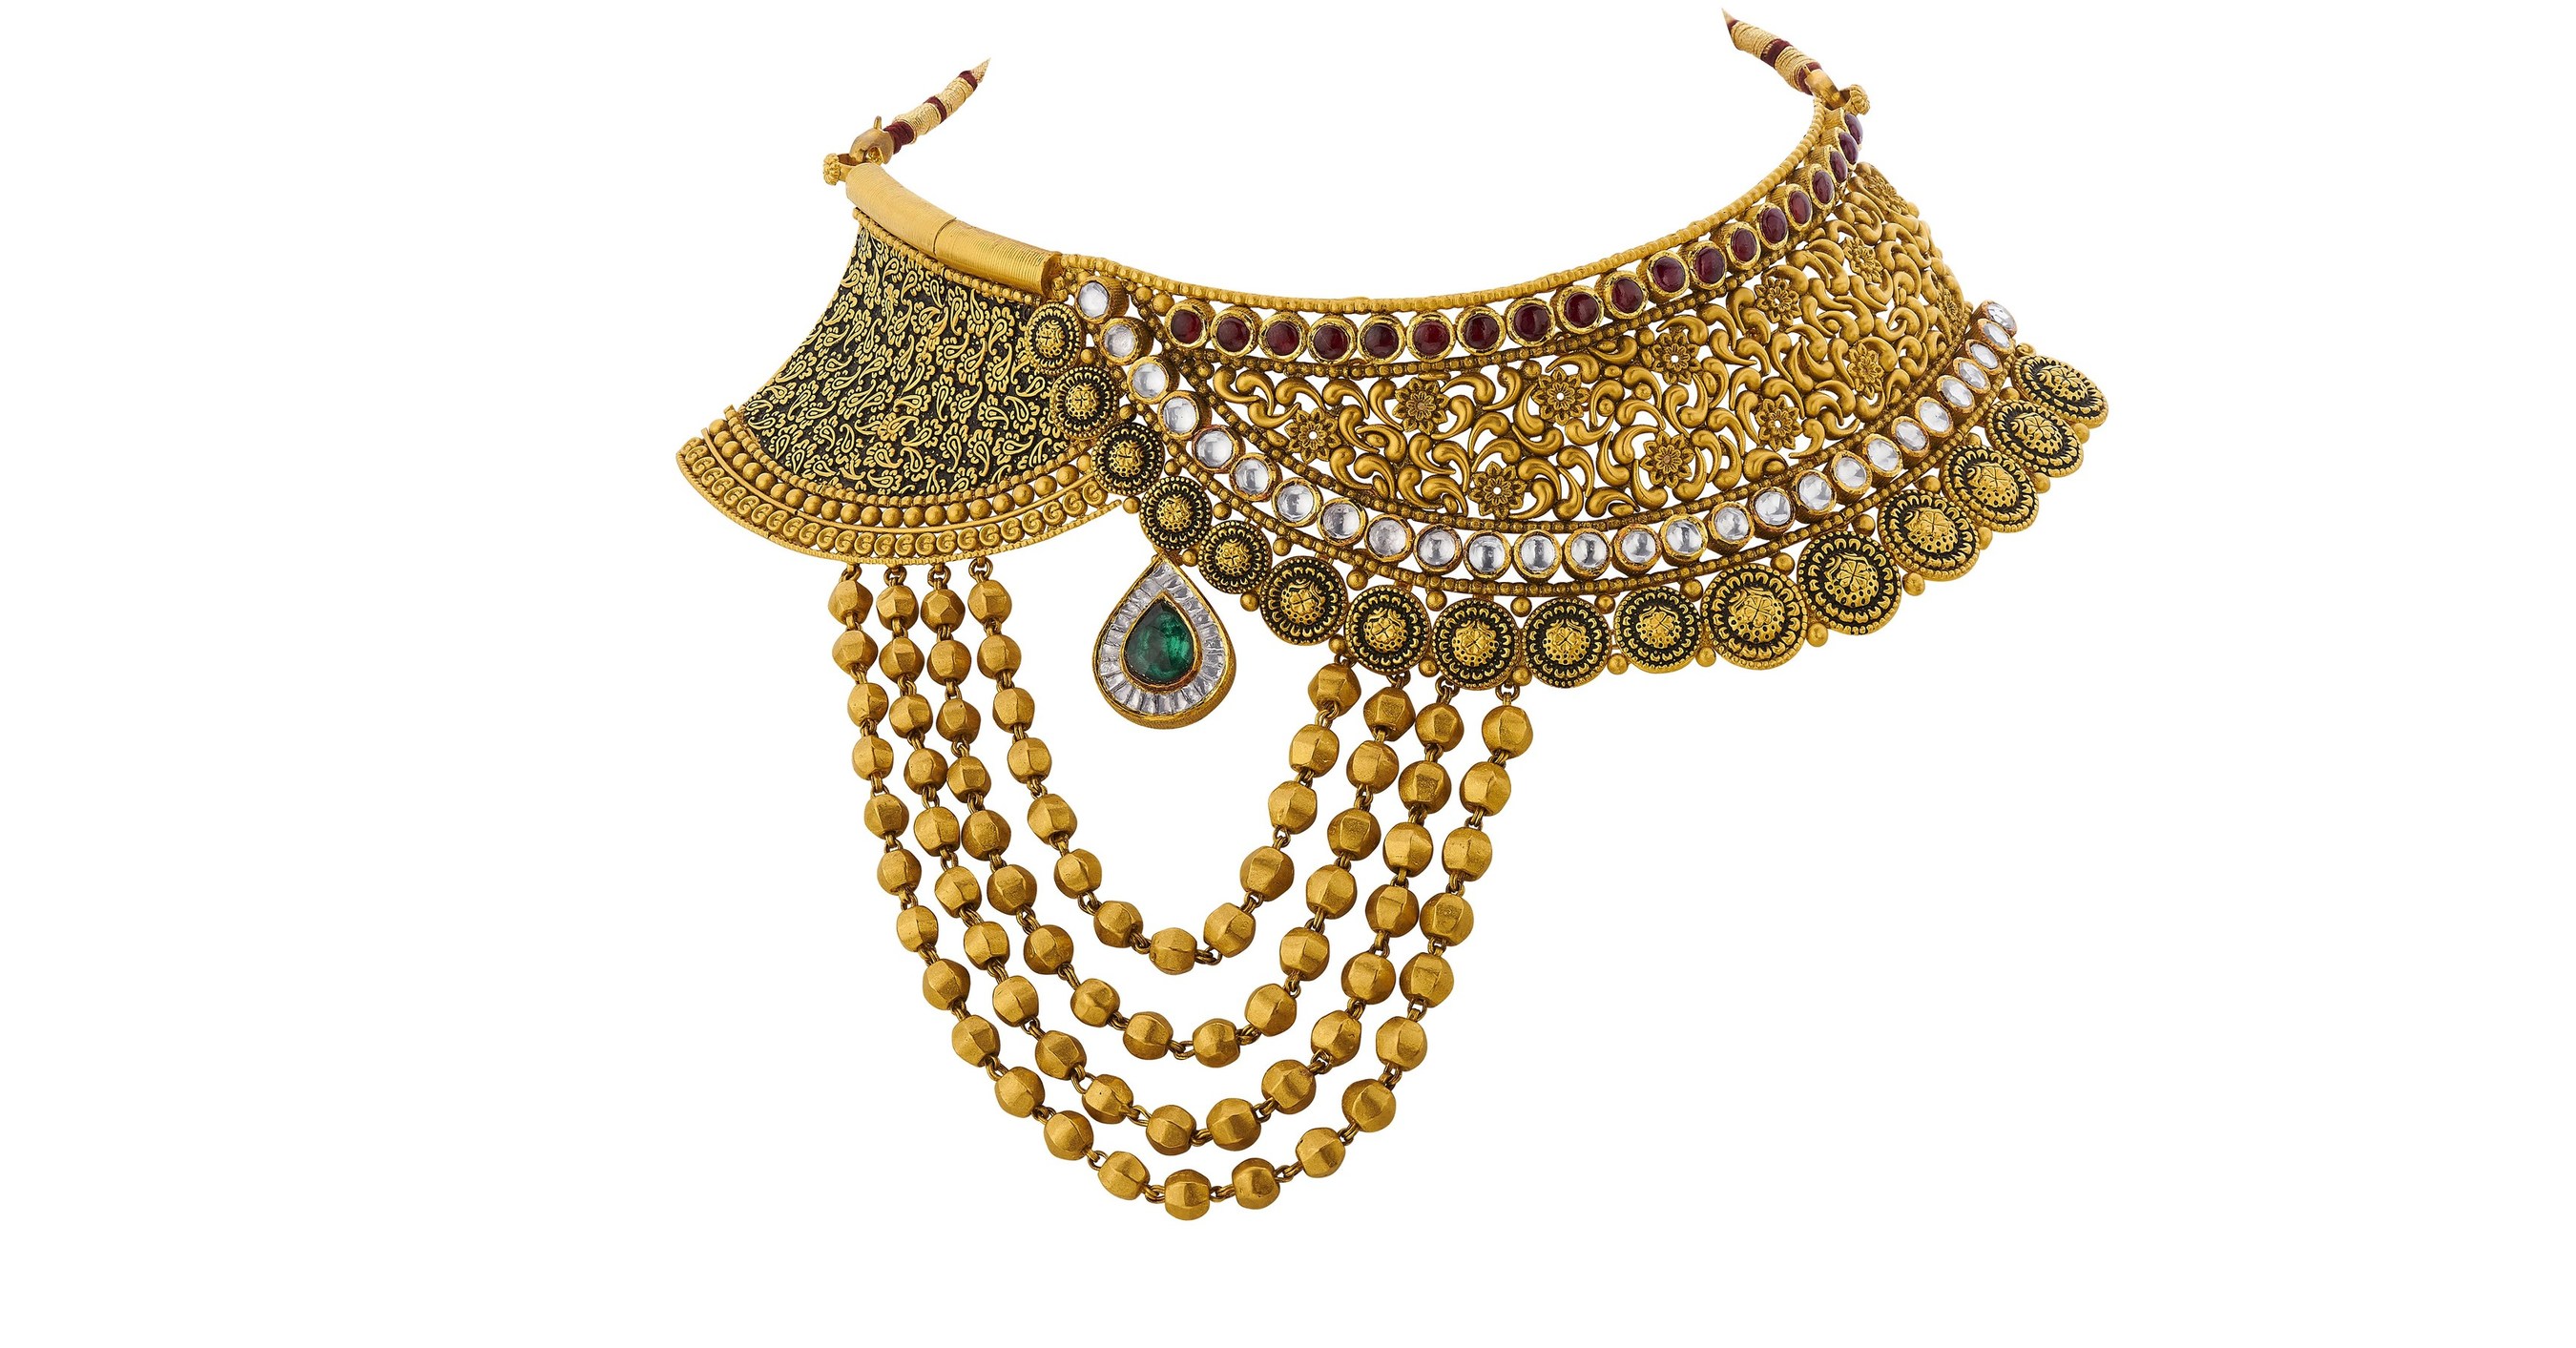 Reliance Jewels - The finest jewellery is the one that